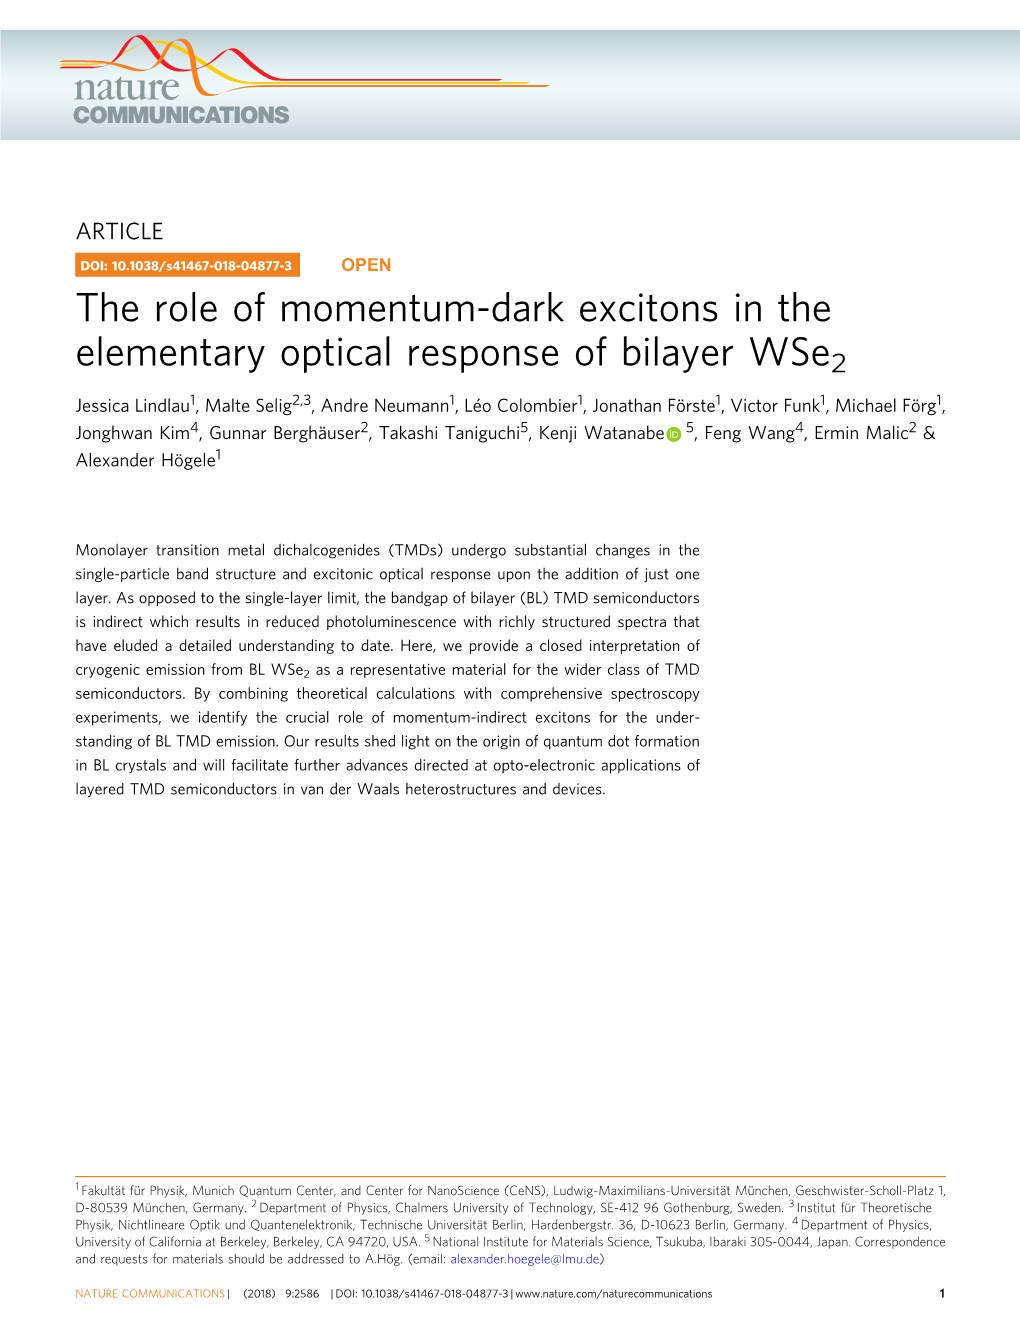 The Role of Momentum-Dark Excitons in the Elementary Optical Response of Bilayer Wse2